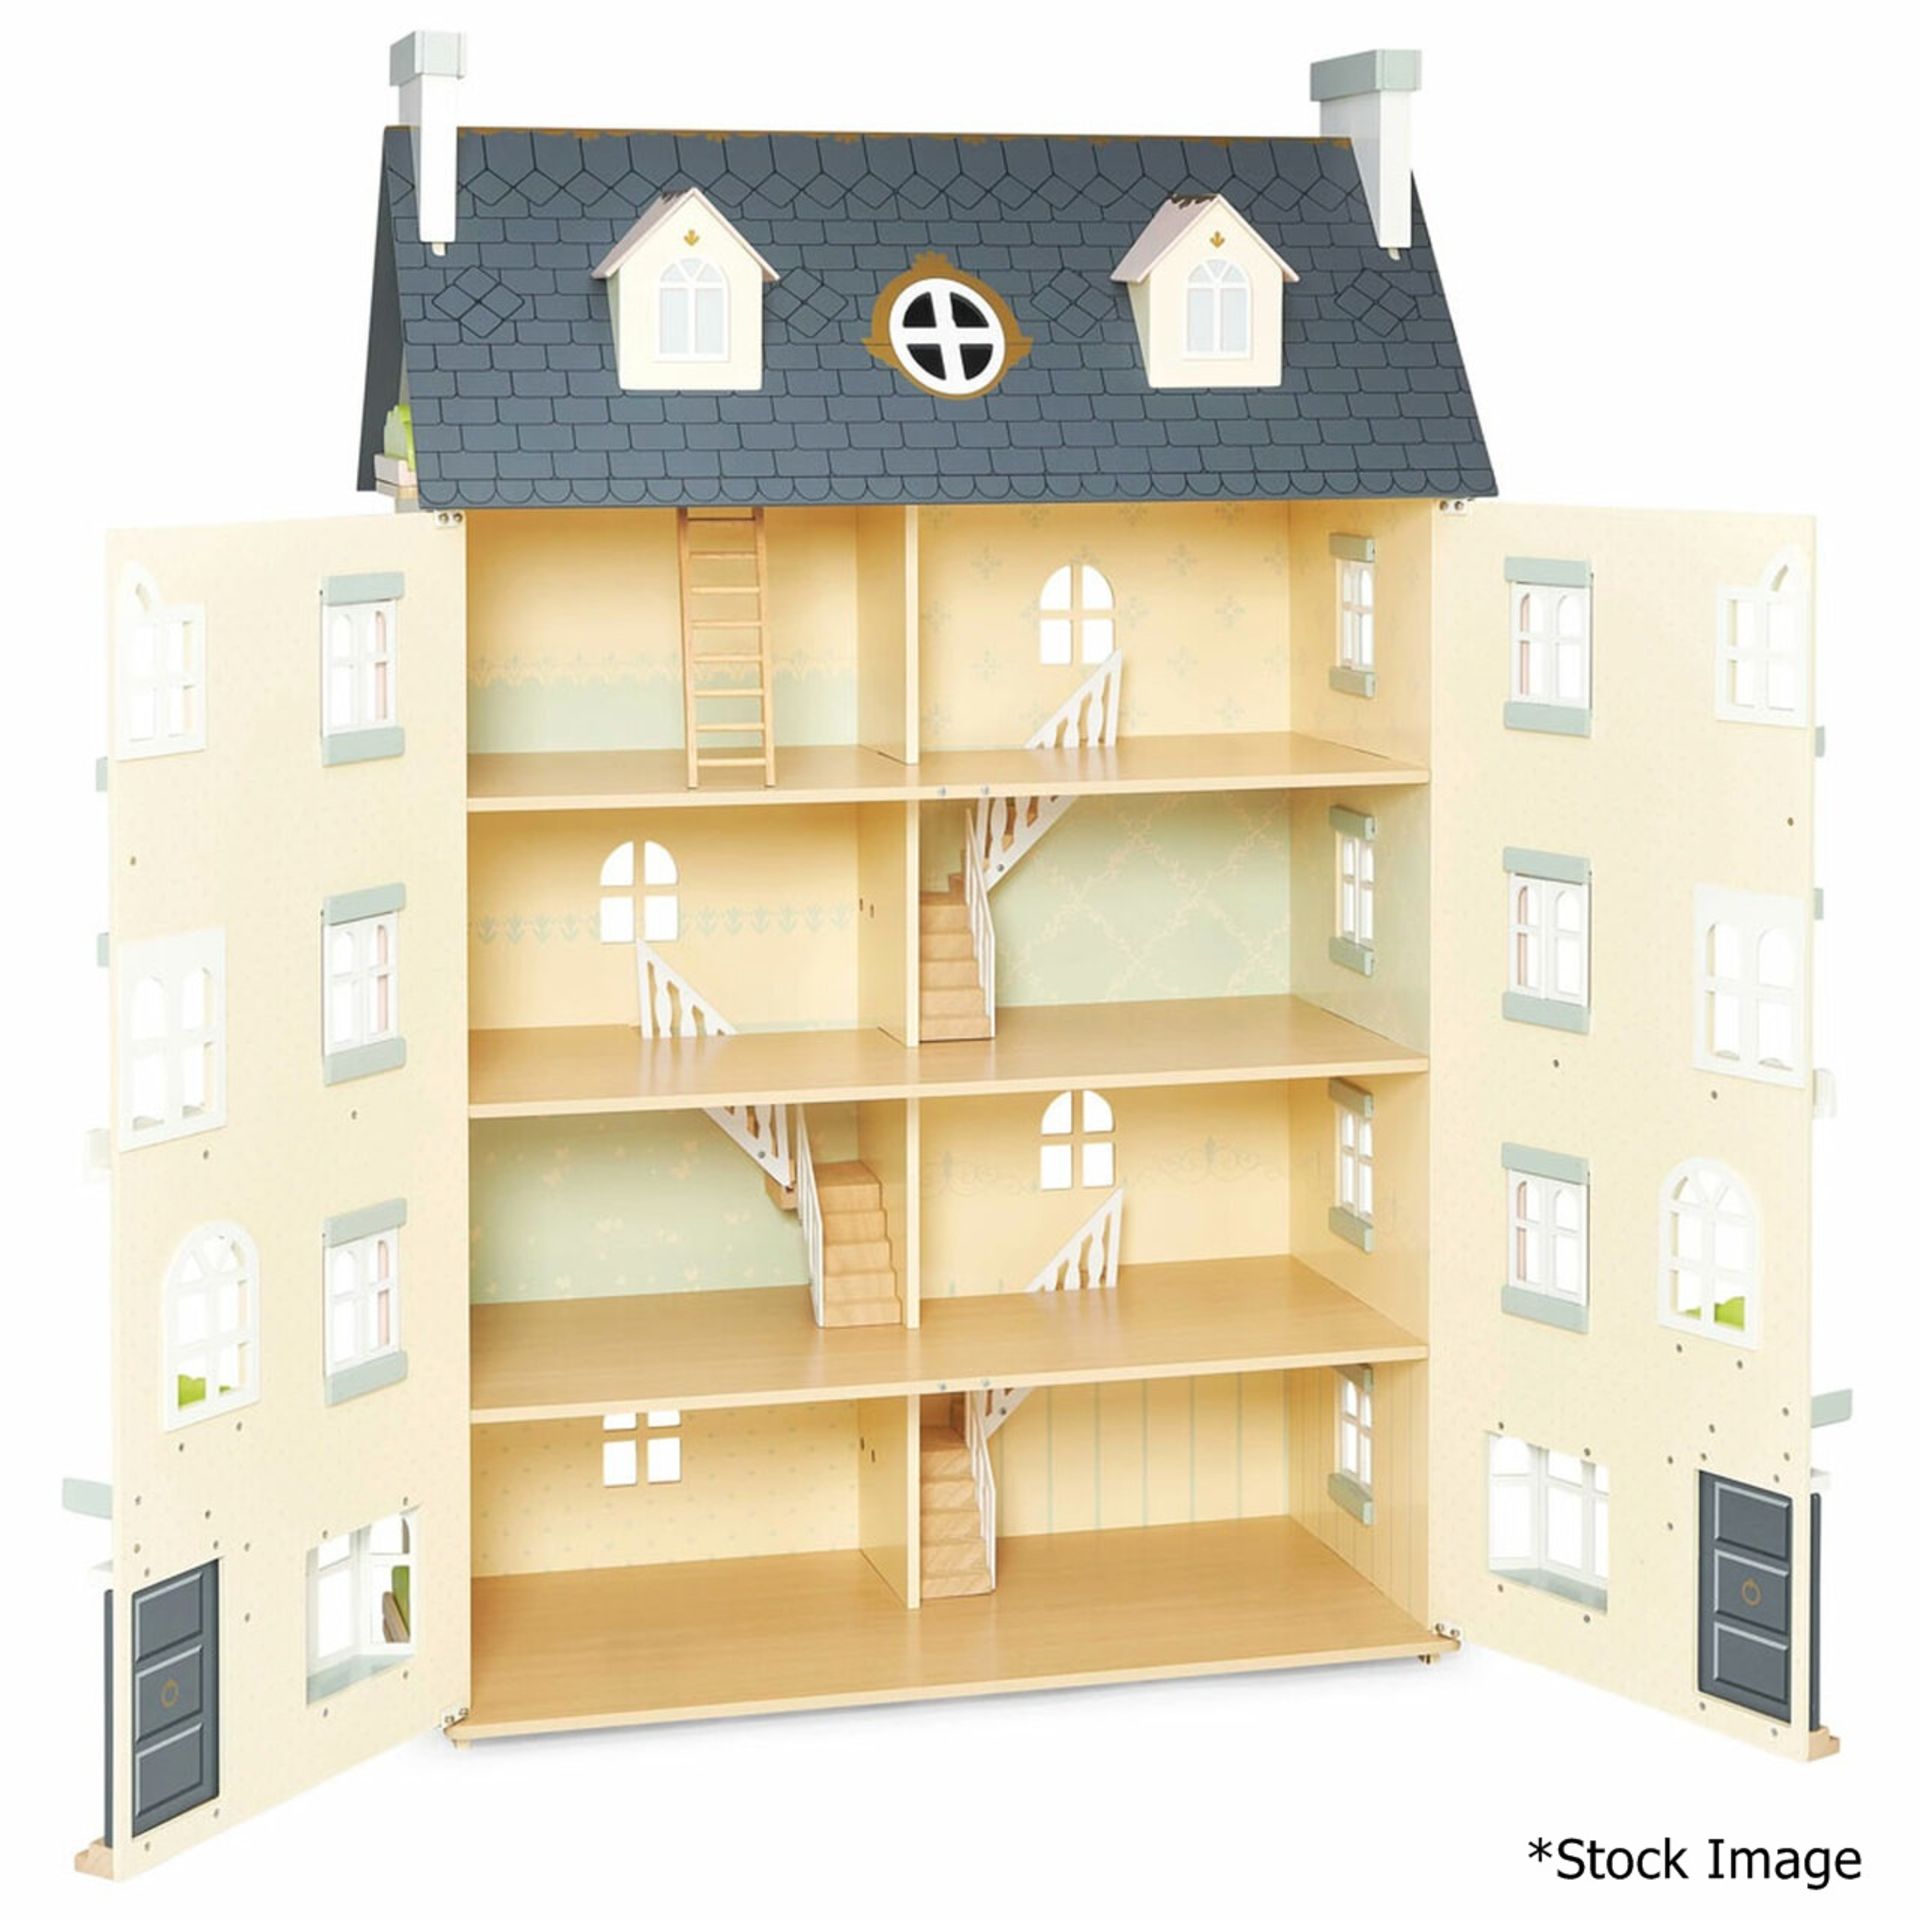 1 x Le Toy Van Wooden Palace Dolls House - New/Boxed - HTYS163 - CL987 - Location: Altrincham WA14 - - Image 7 of 10